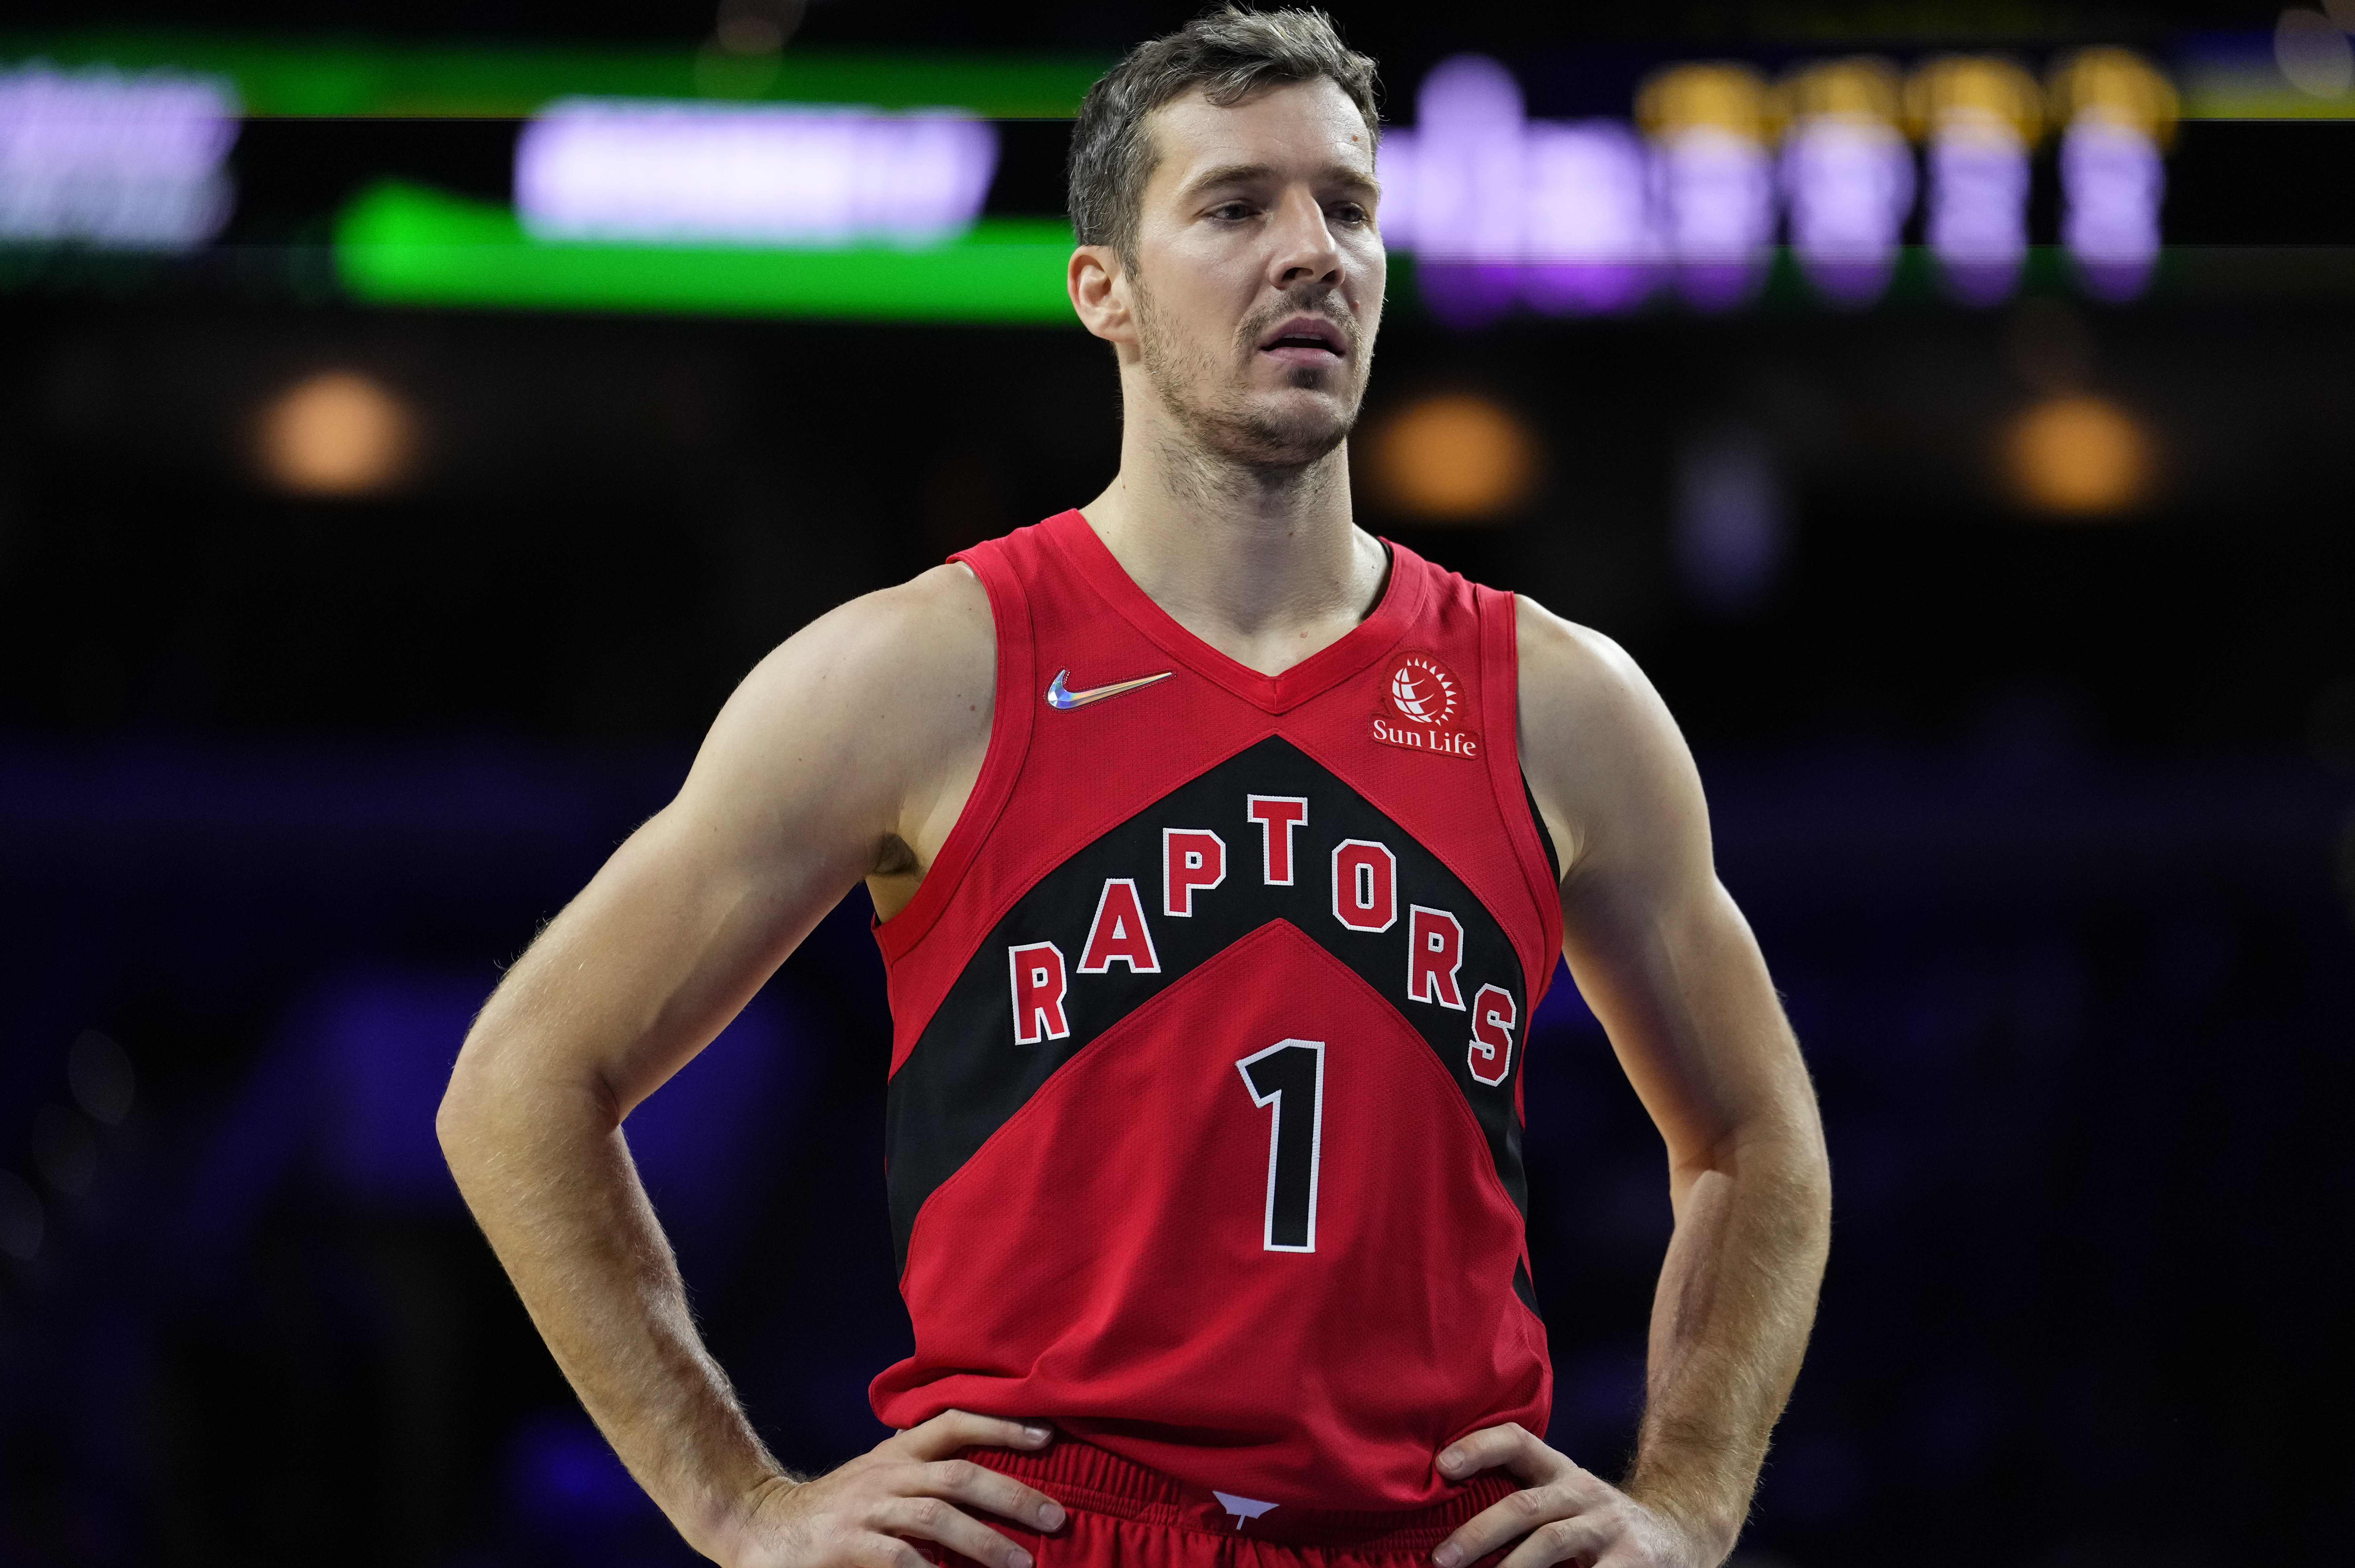 NBA Rumors: Goran Dragic to Sign with Nets After Contract Buyout from Spurs